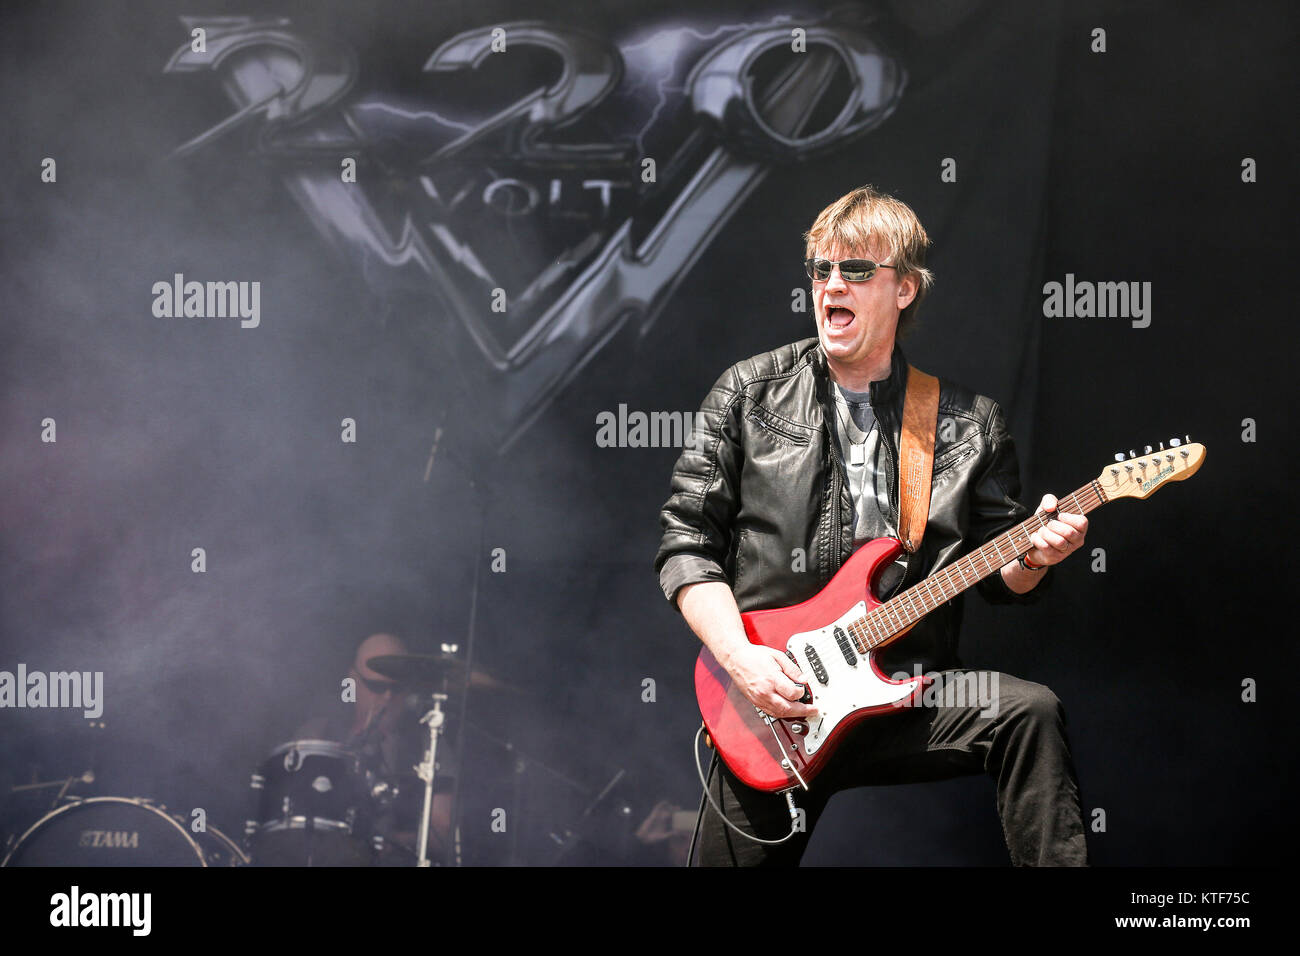 The Swedish hard rock band 220 Volt performs a live concert at the Sweden Rock Festival 2016. Here guitarist Thomas Drevin is seen live on stage. Sweden, 10/06 2016. Stock Photo